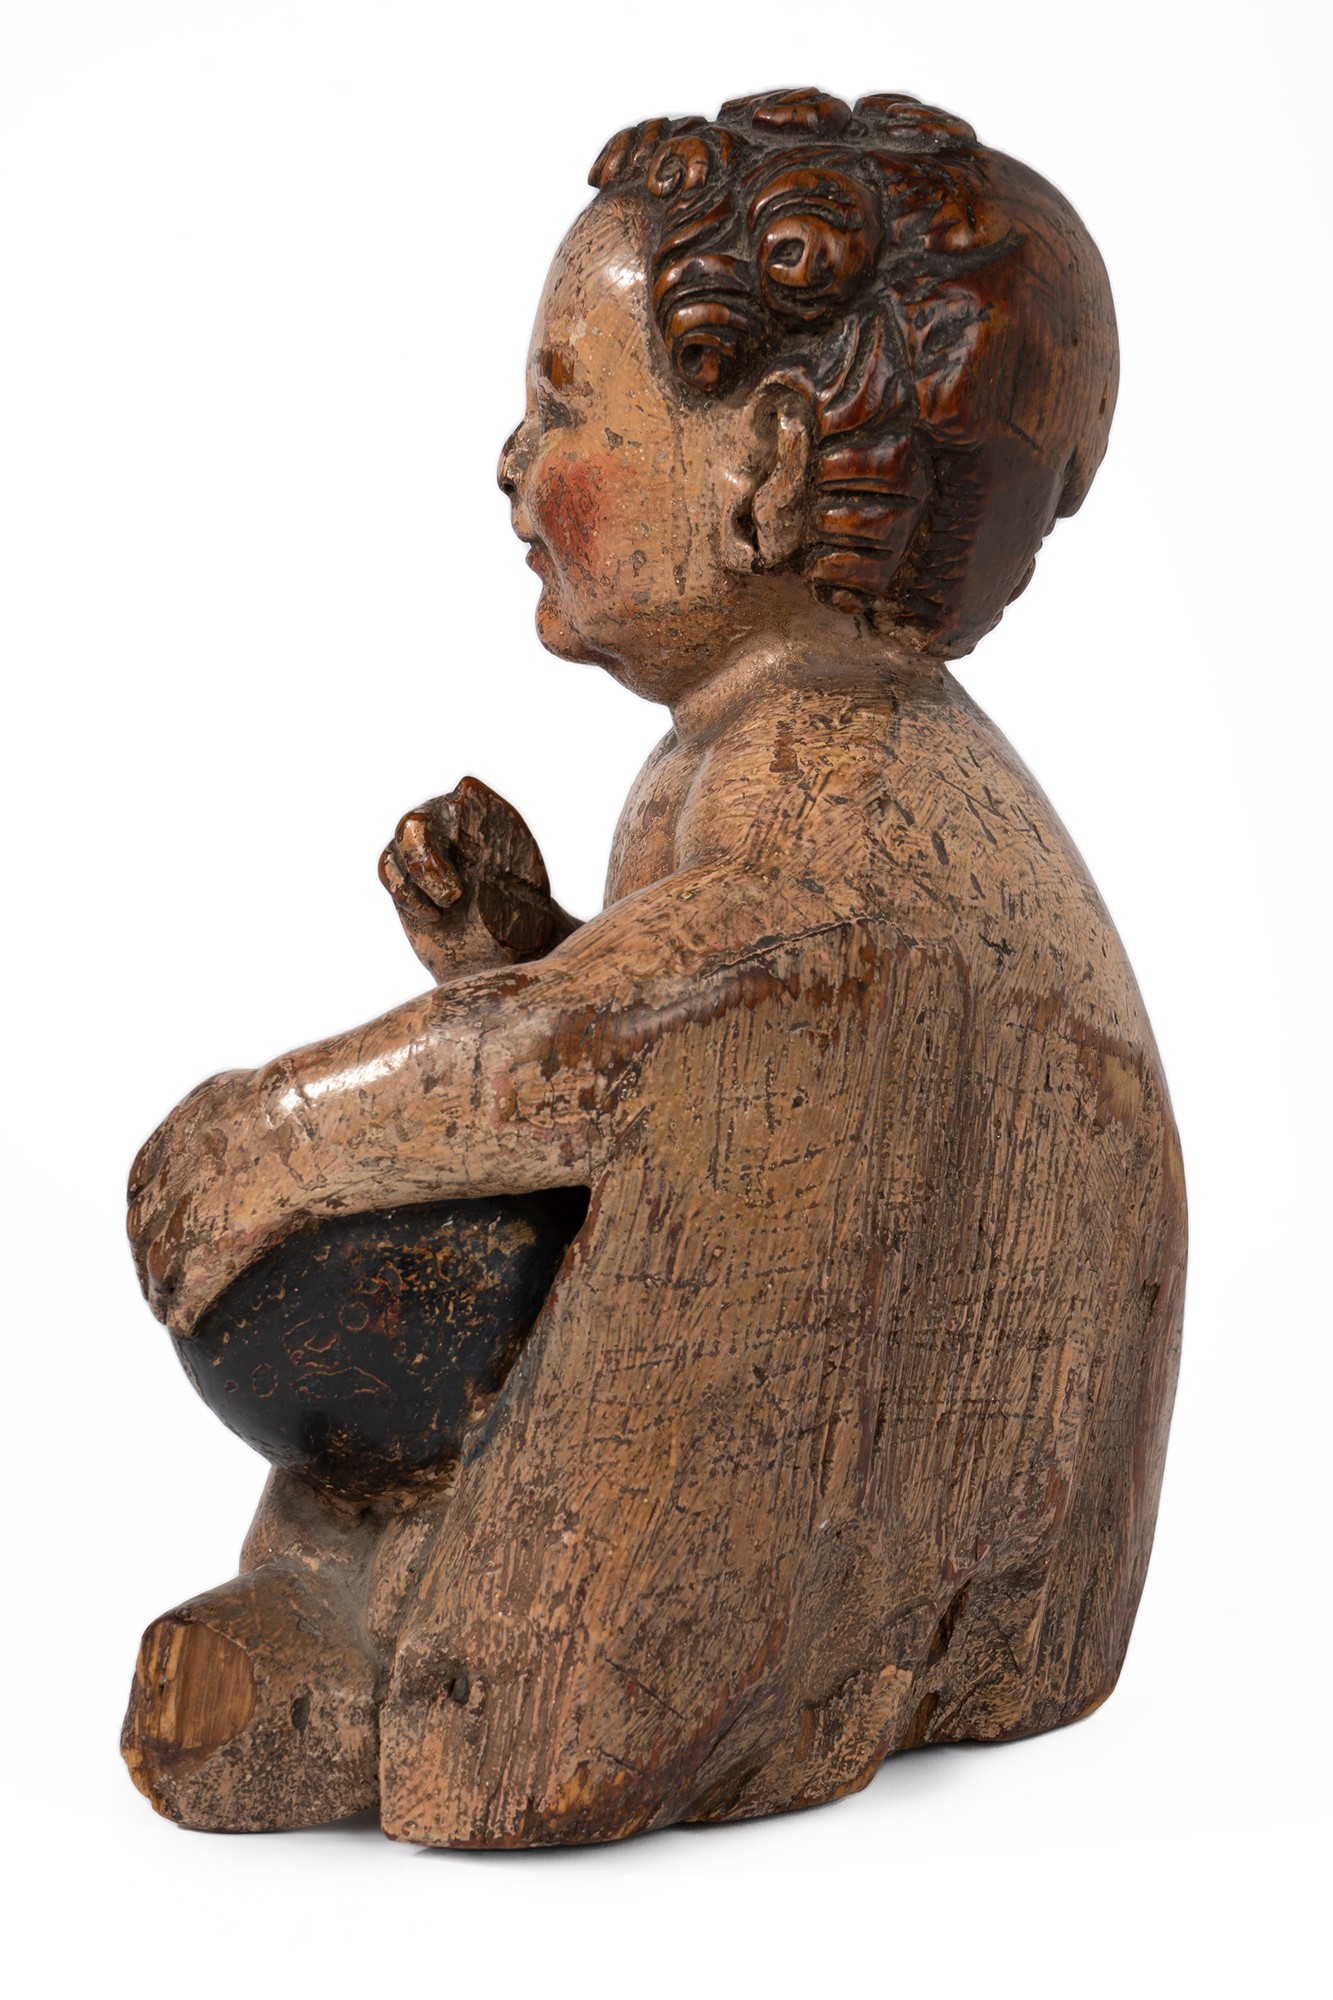 Polychrome wooden sculpture representing Baby Jesus with globe, 17th century - Image 4 of 6